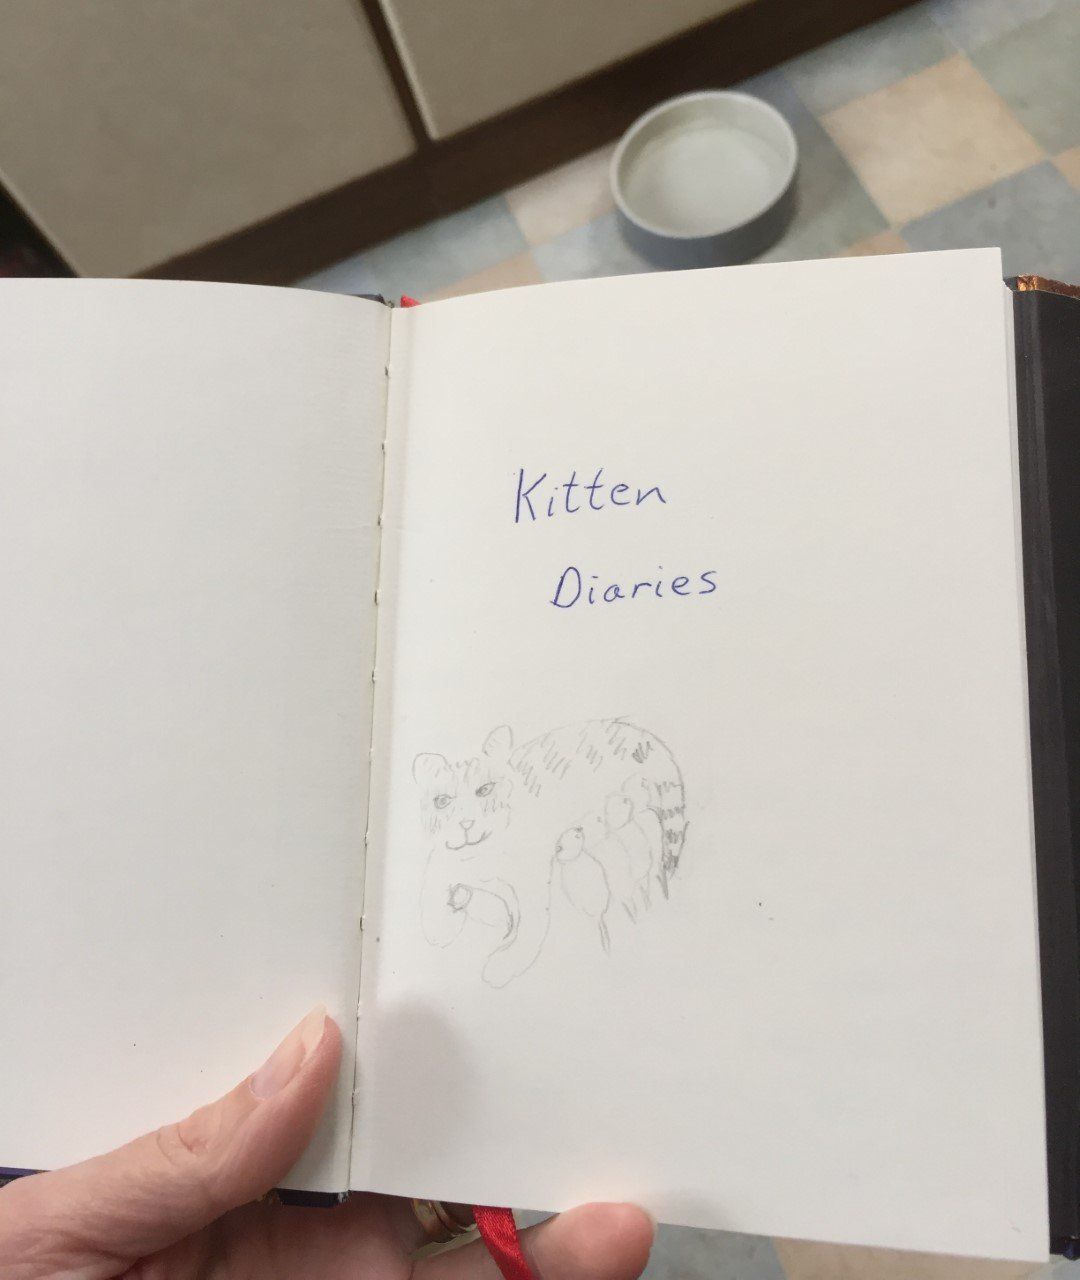 Photo of kitten diaries that became a book.